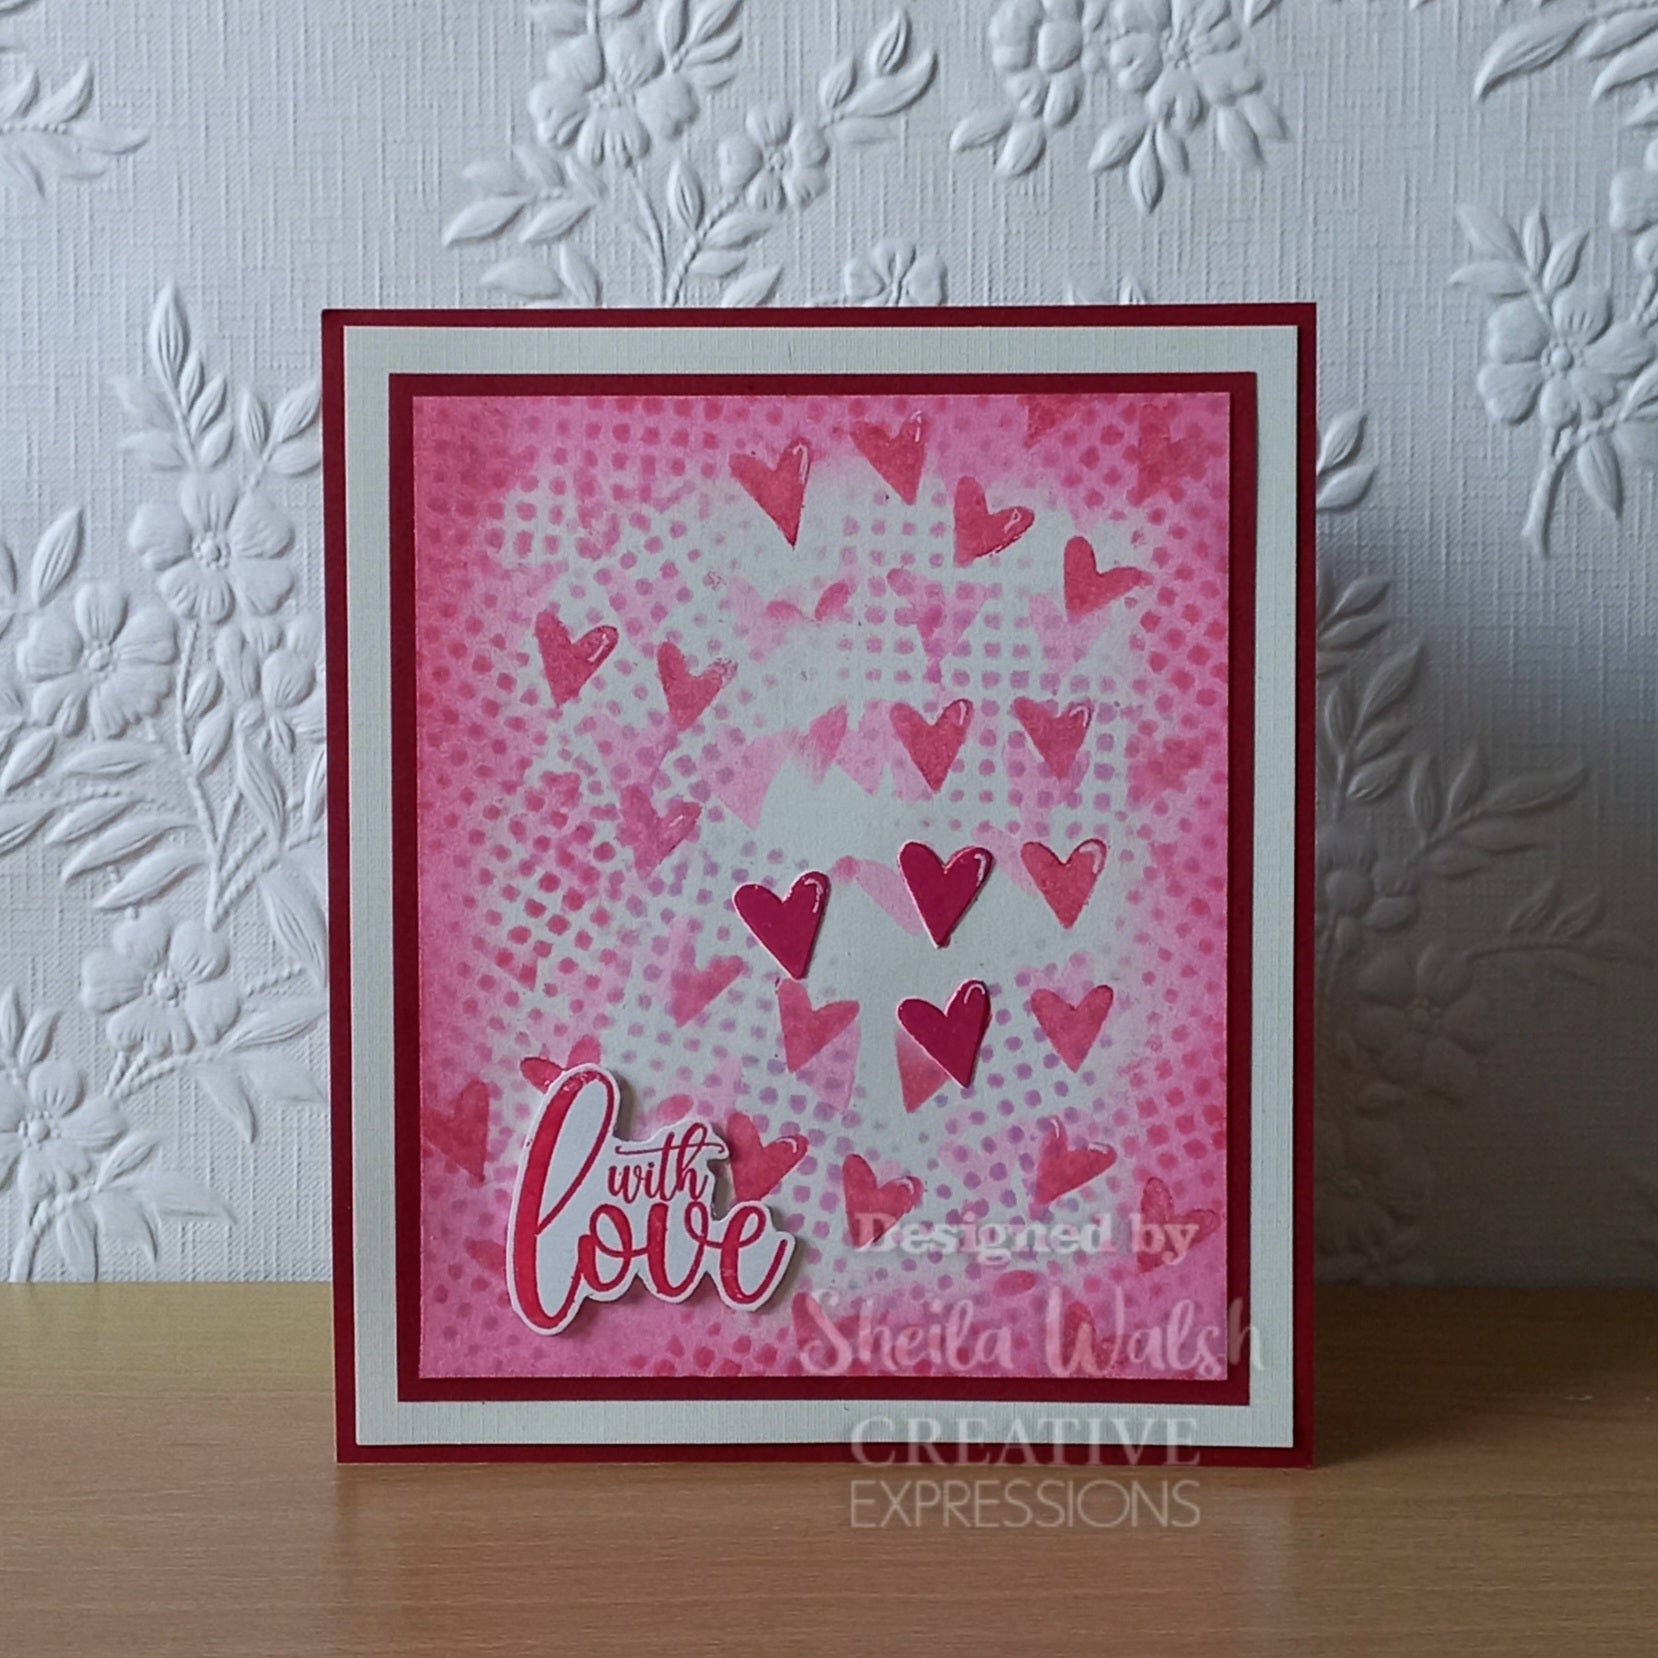 Creative Expressions Mini Stencil You Have My Heart 4 in x 3 in